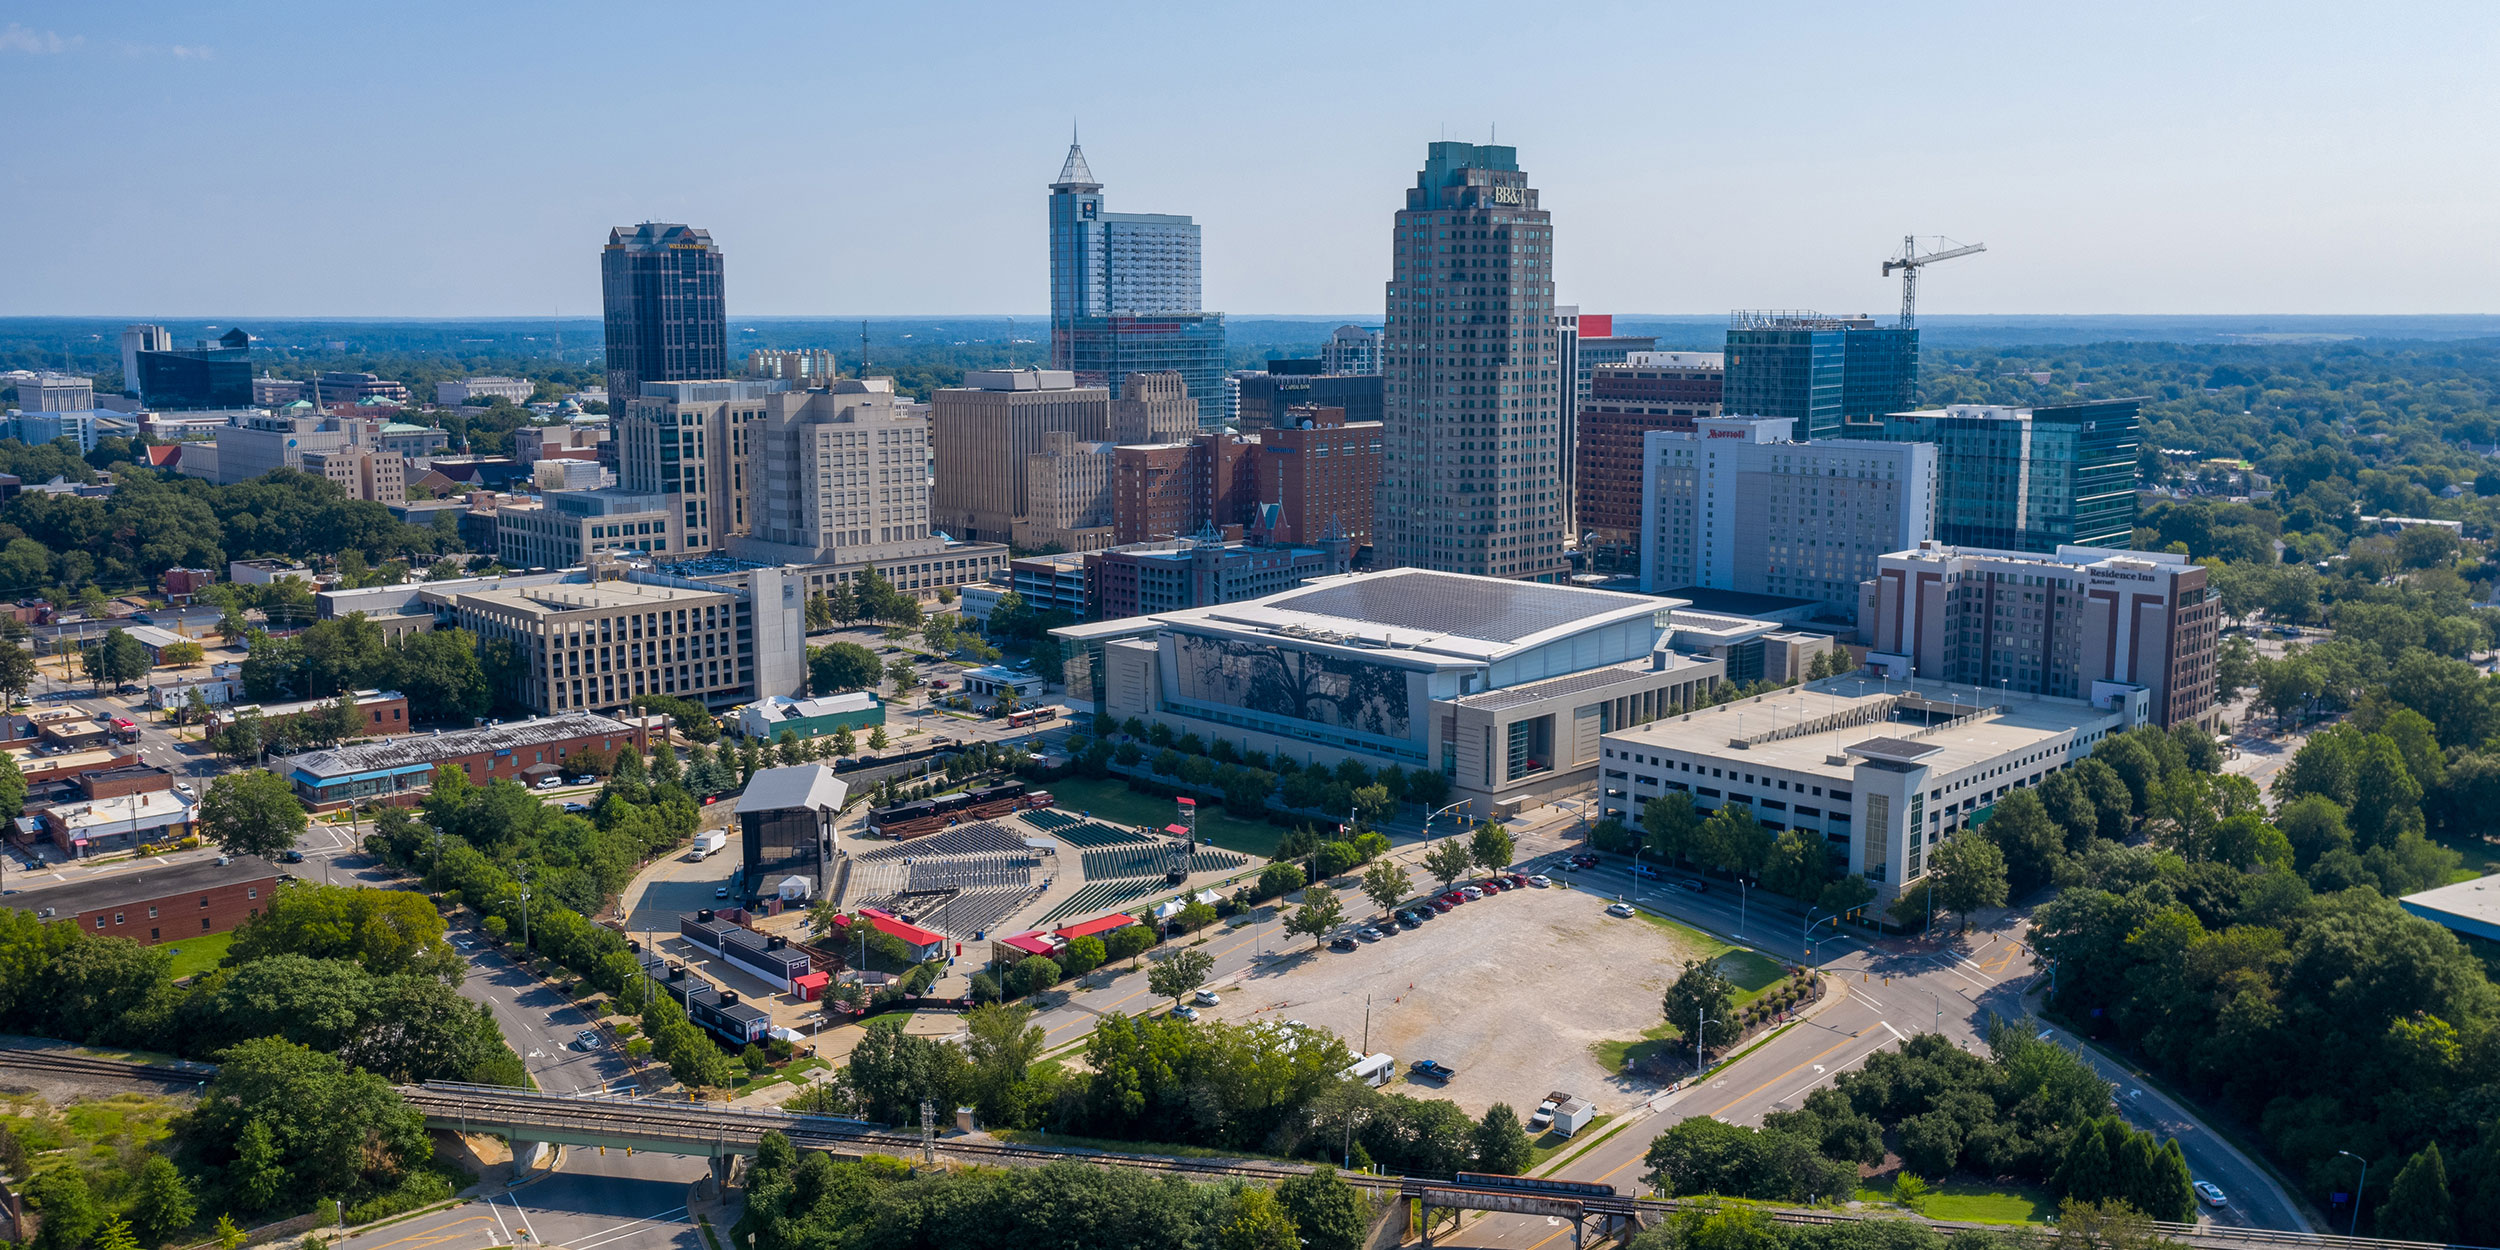 The Raleigh skyline at daytime with a view of an outdoor concert venue, the convention center, and a few skyscrapers in Wake County